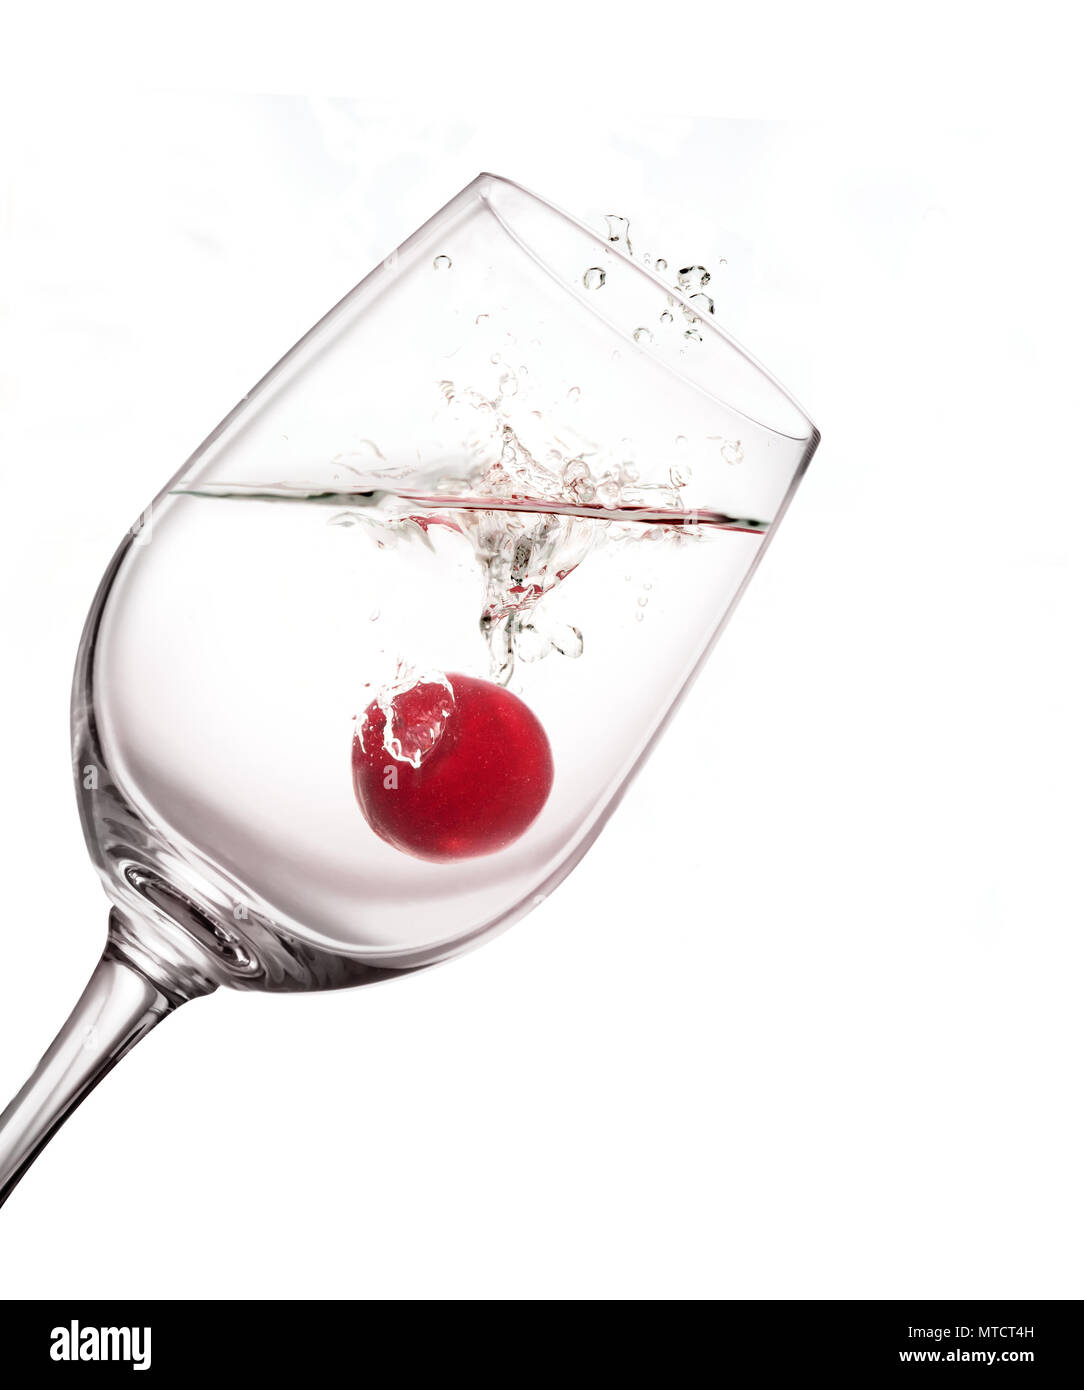 Wine glass with sherry on white background. Stock Photo